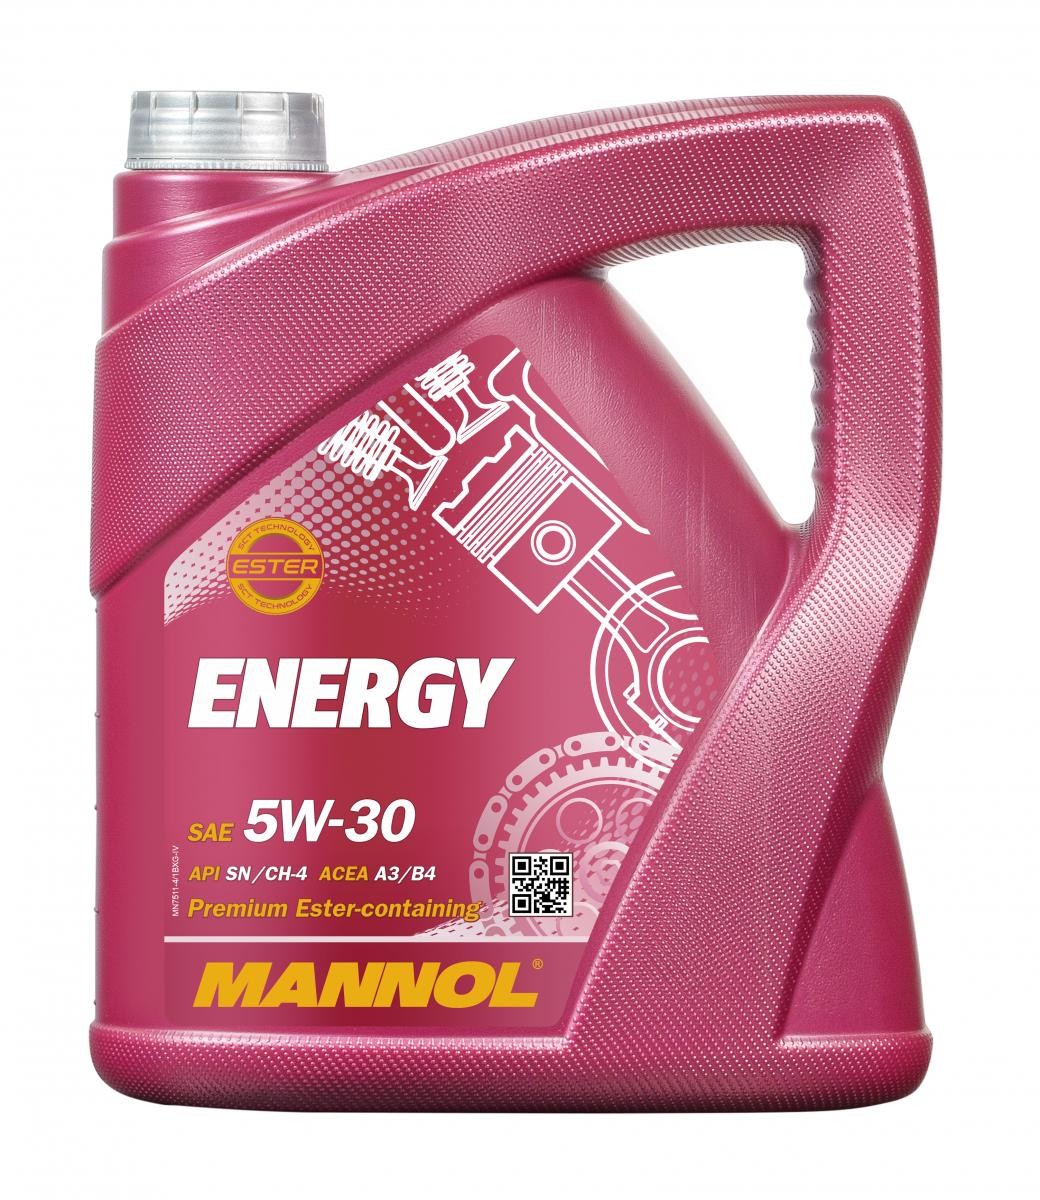 MANNOL ENERGY MN7511-4 Engine oil 5W-30, 4l, Part Synthetic Oil